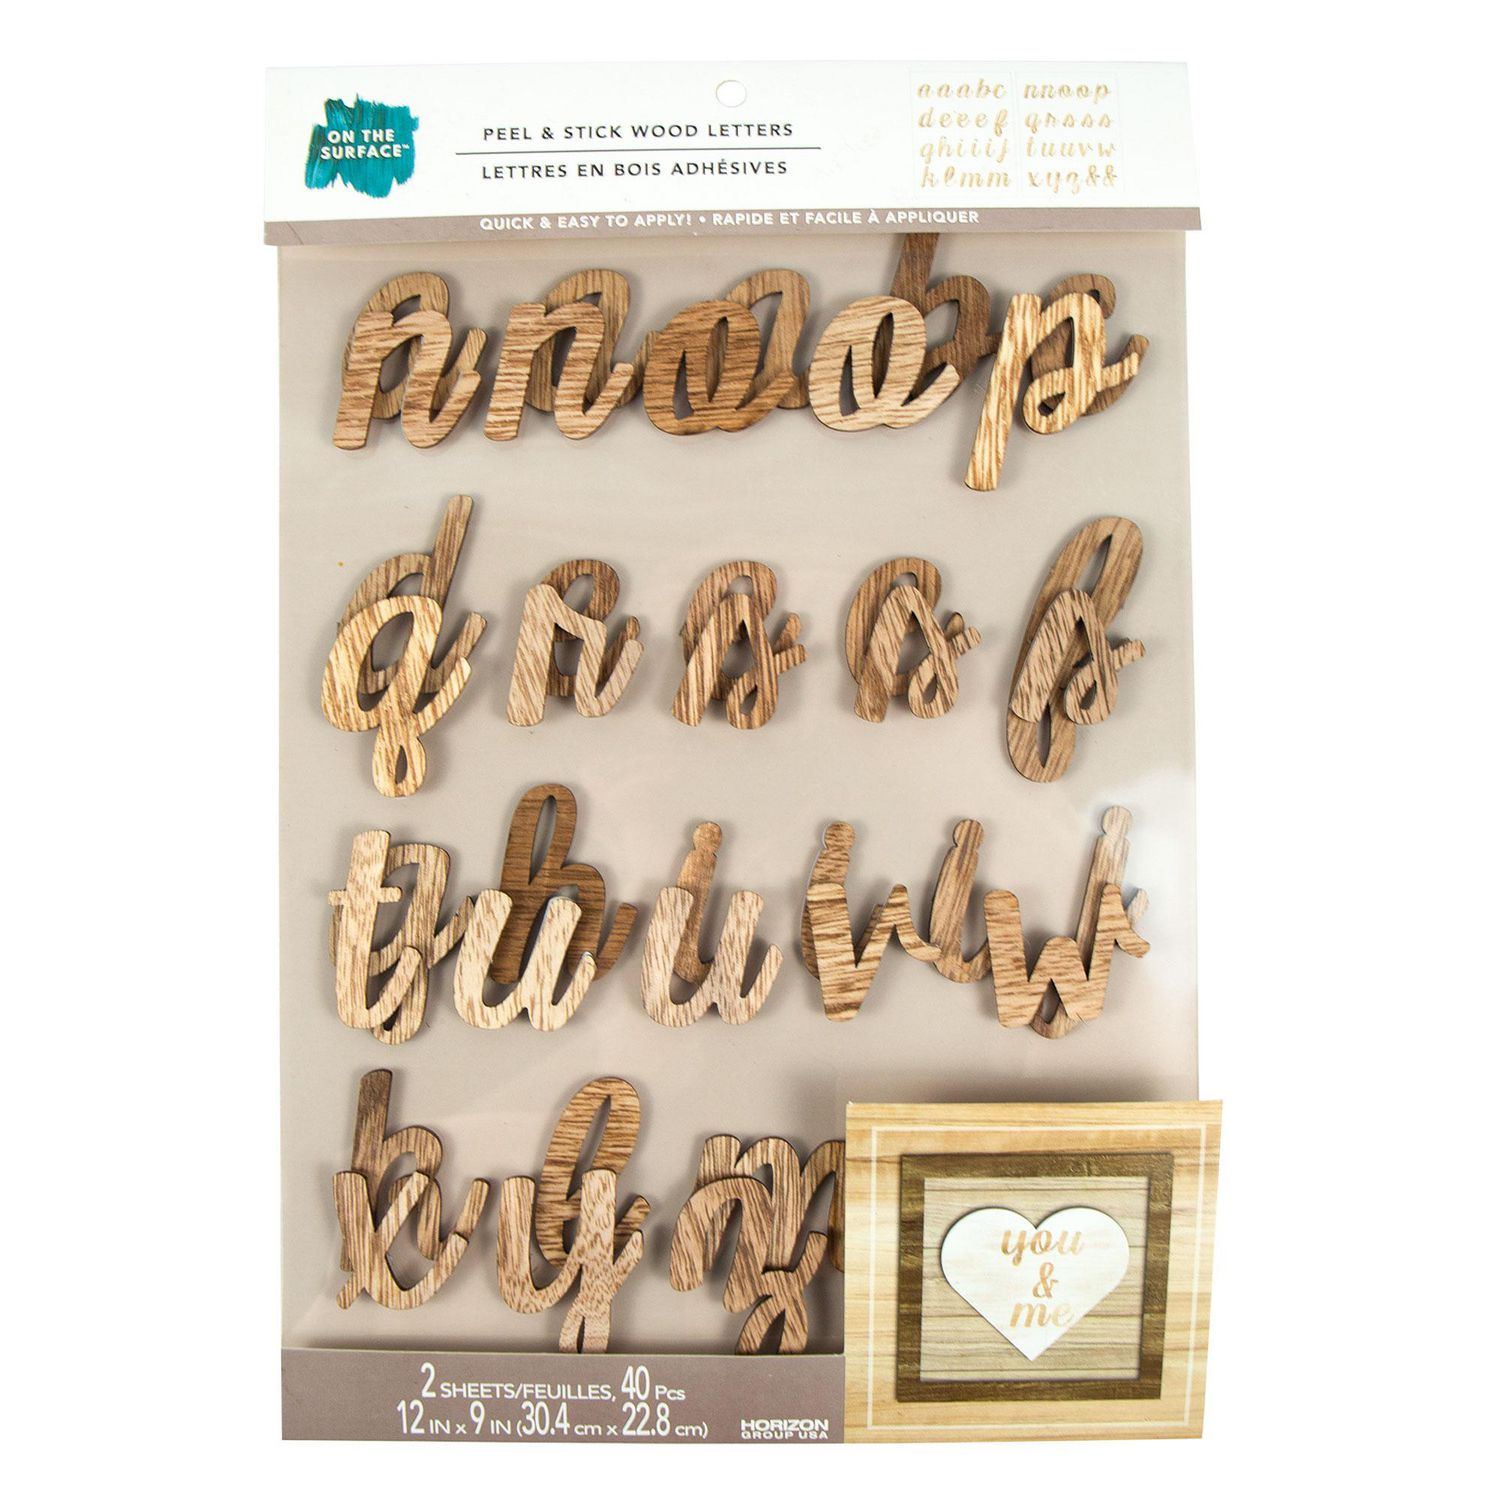  Wood Burning Tips Letters Uppercase Alphabet Branding and  Personalization Set for Wood and Other Surfaces by Wooden Letters (Include  26 Letters +2 Drawing Tips+6 Stencils) : Arts, Crafts & Sewing